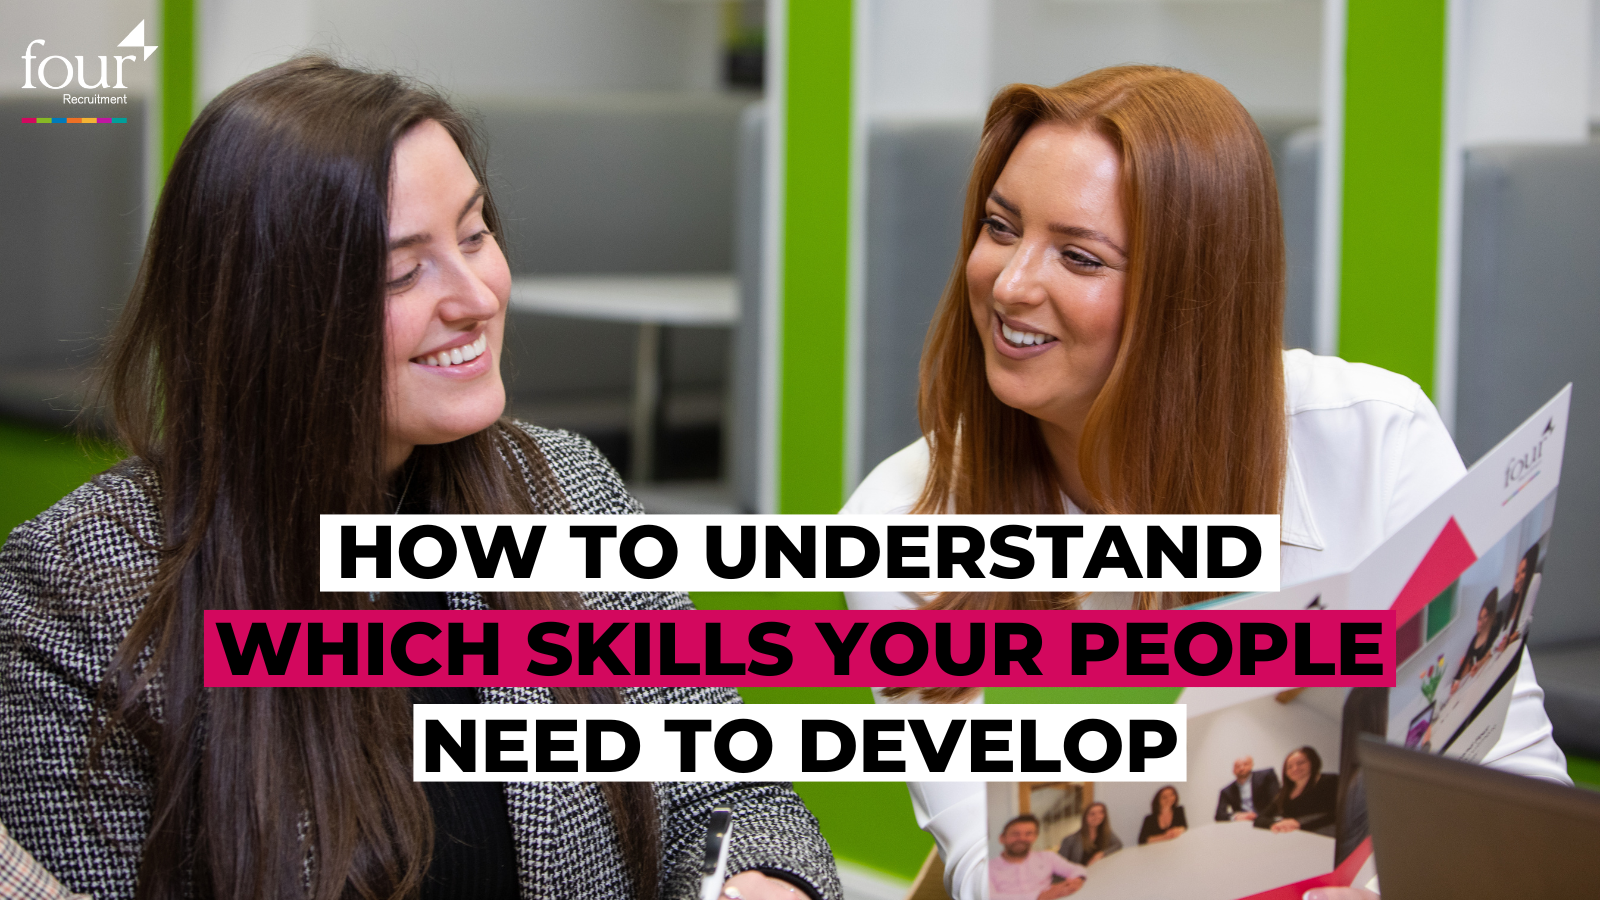 How to Understand Which Skills Your People Need to Develop